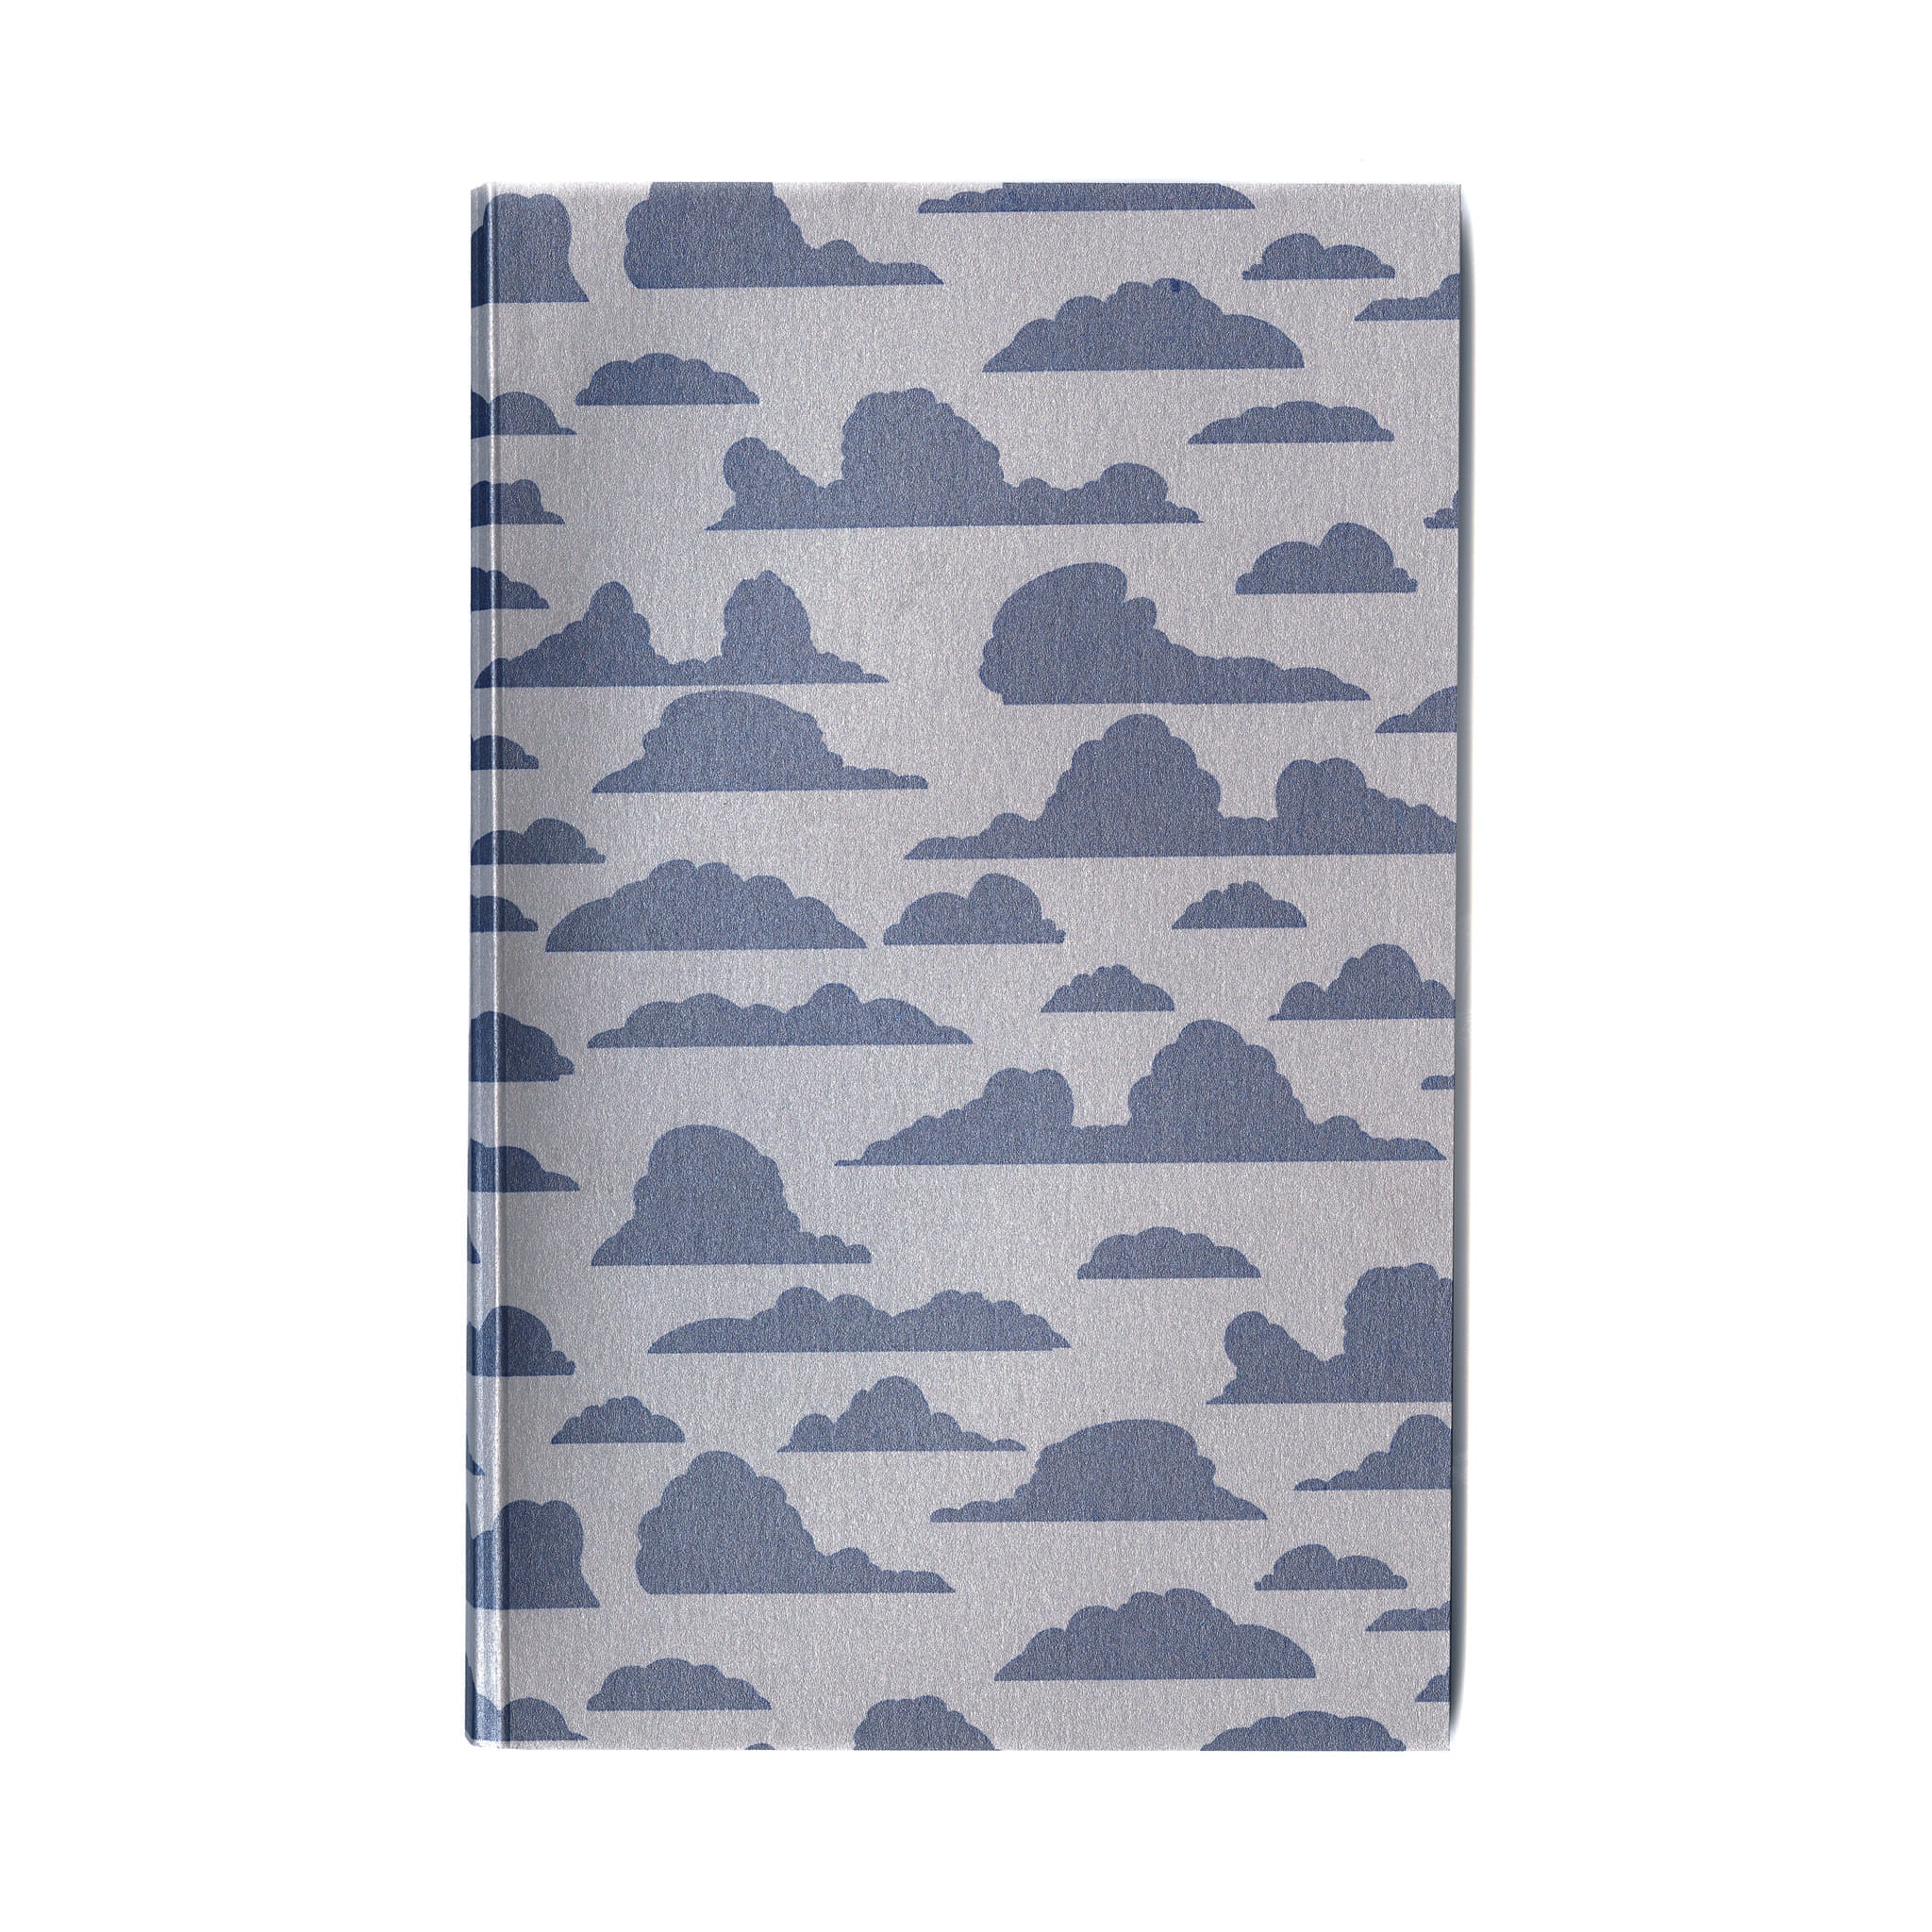 Everyday journal with original blue cloudy print cover and eighty 100% cotton paper pages